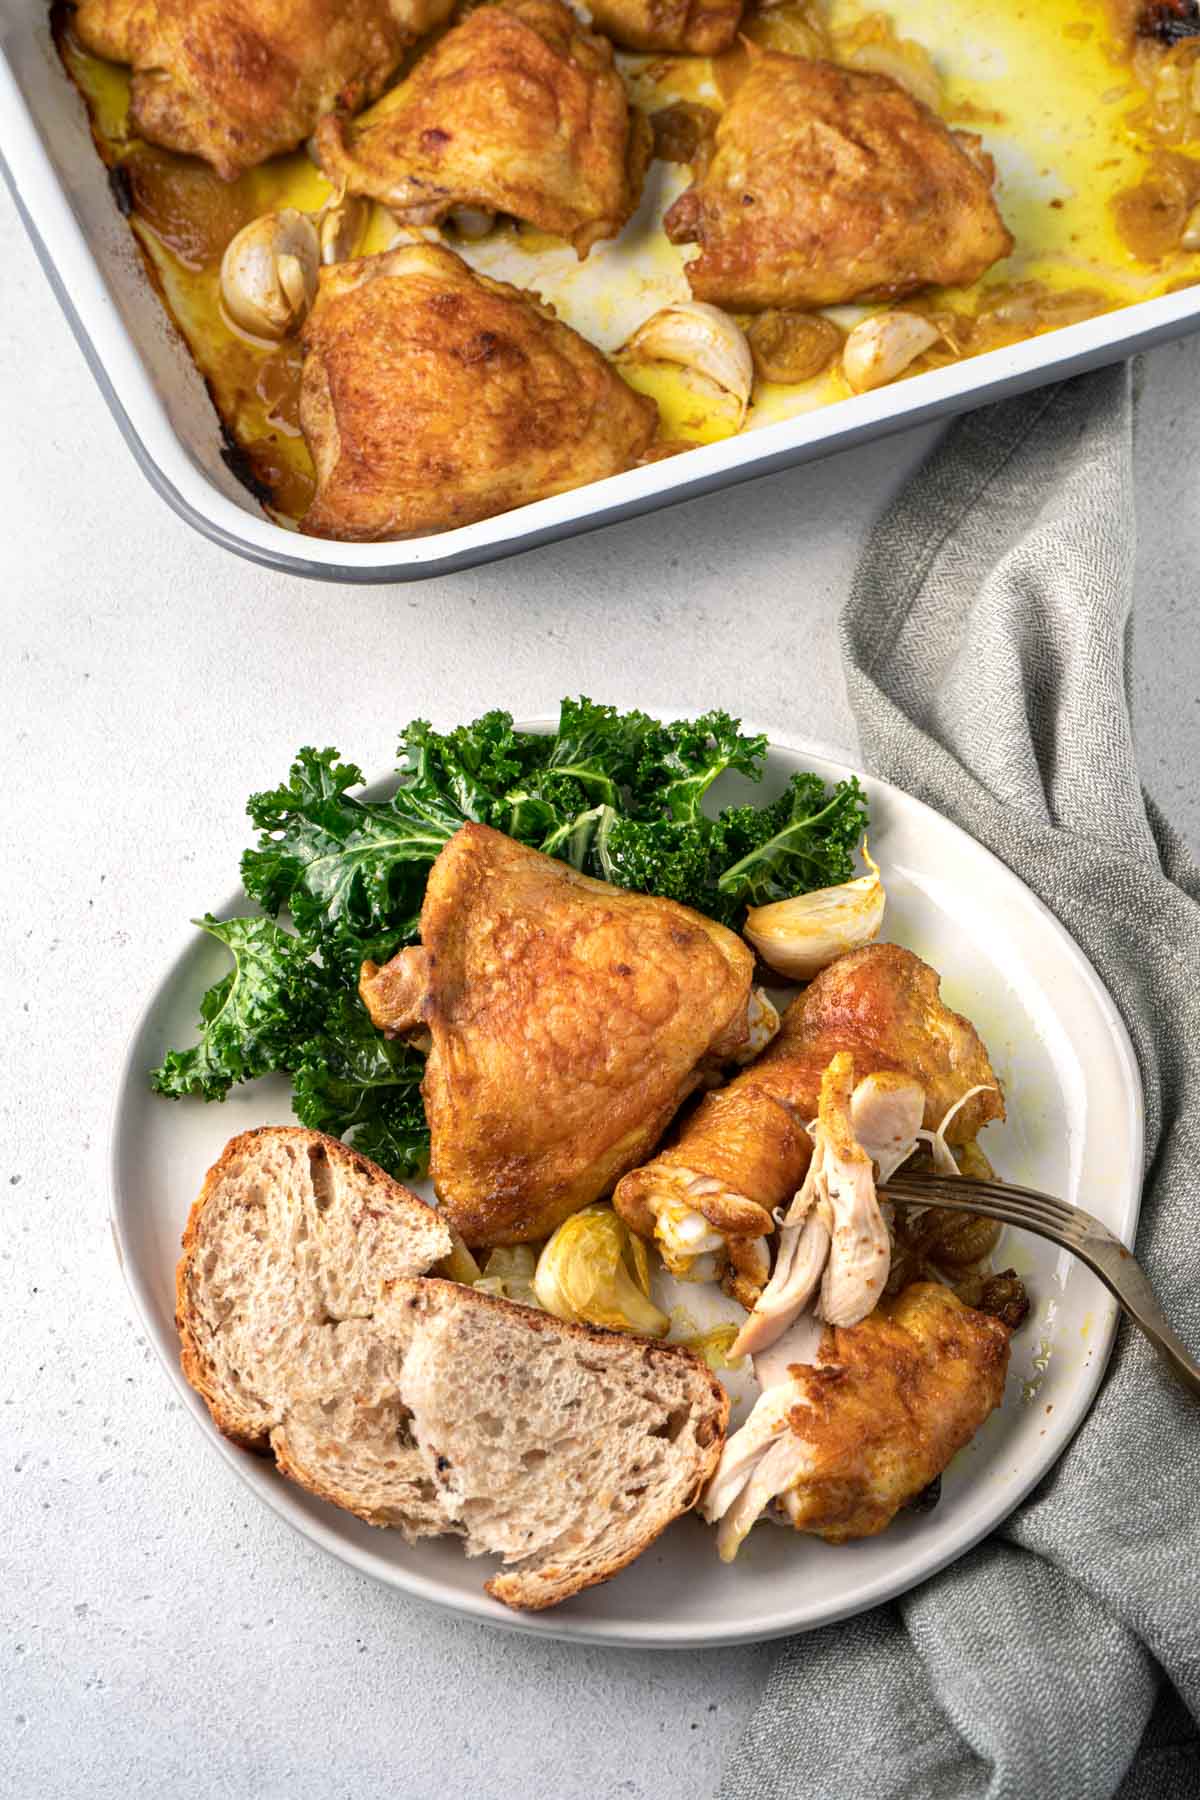 Baked chicken thighs, bread and kale salad on a plate. 